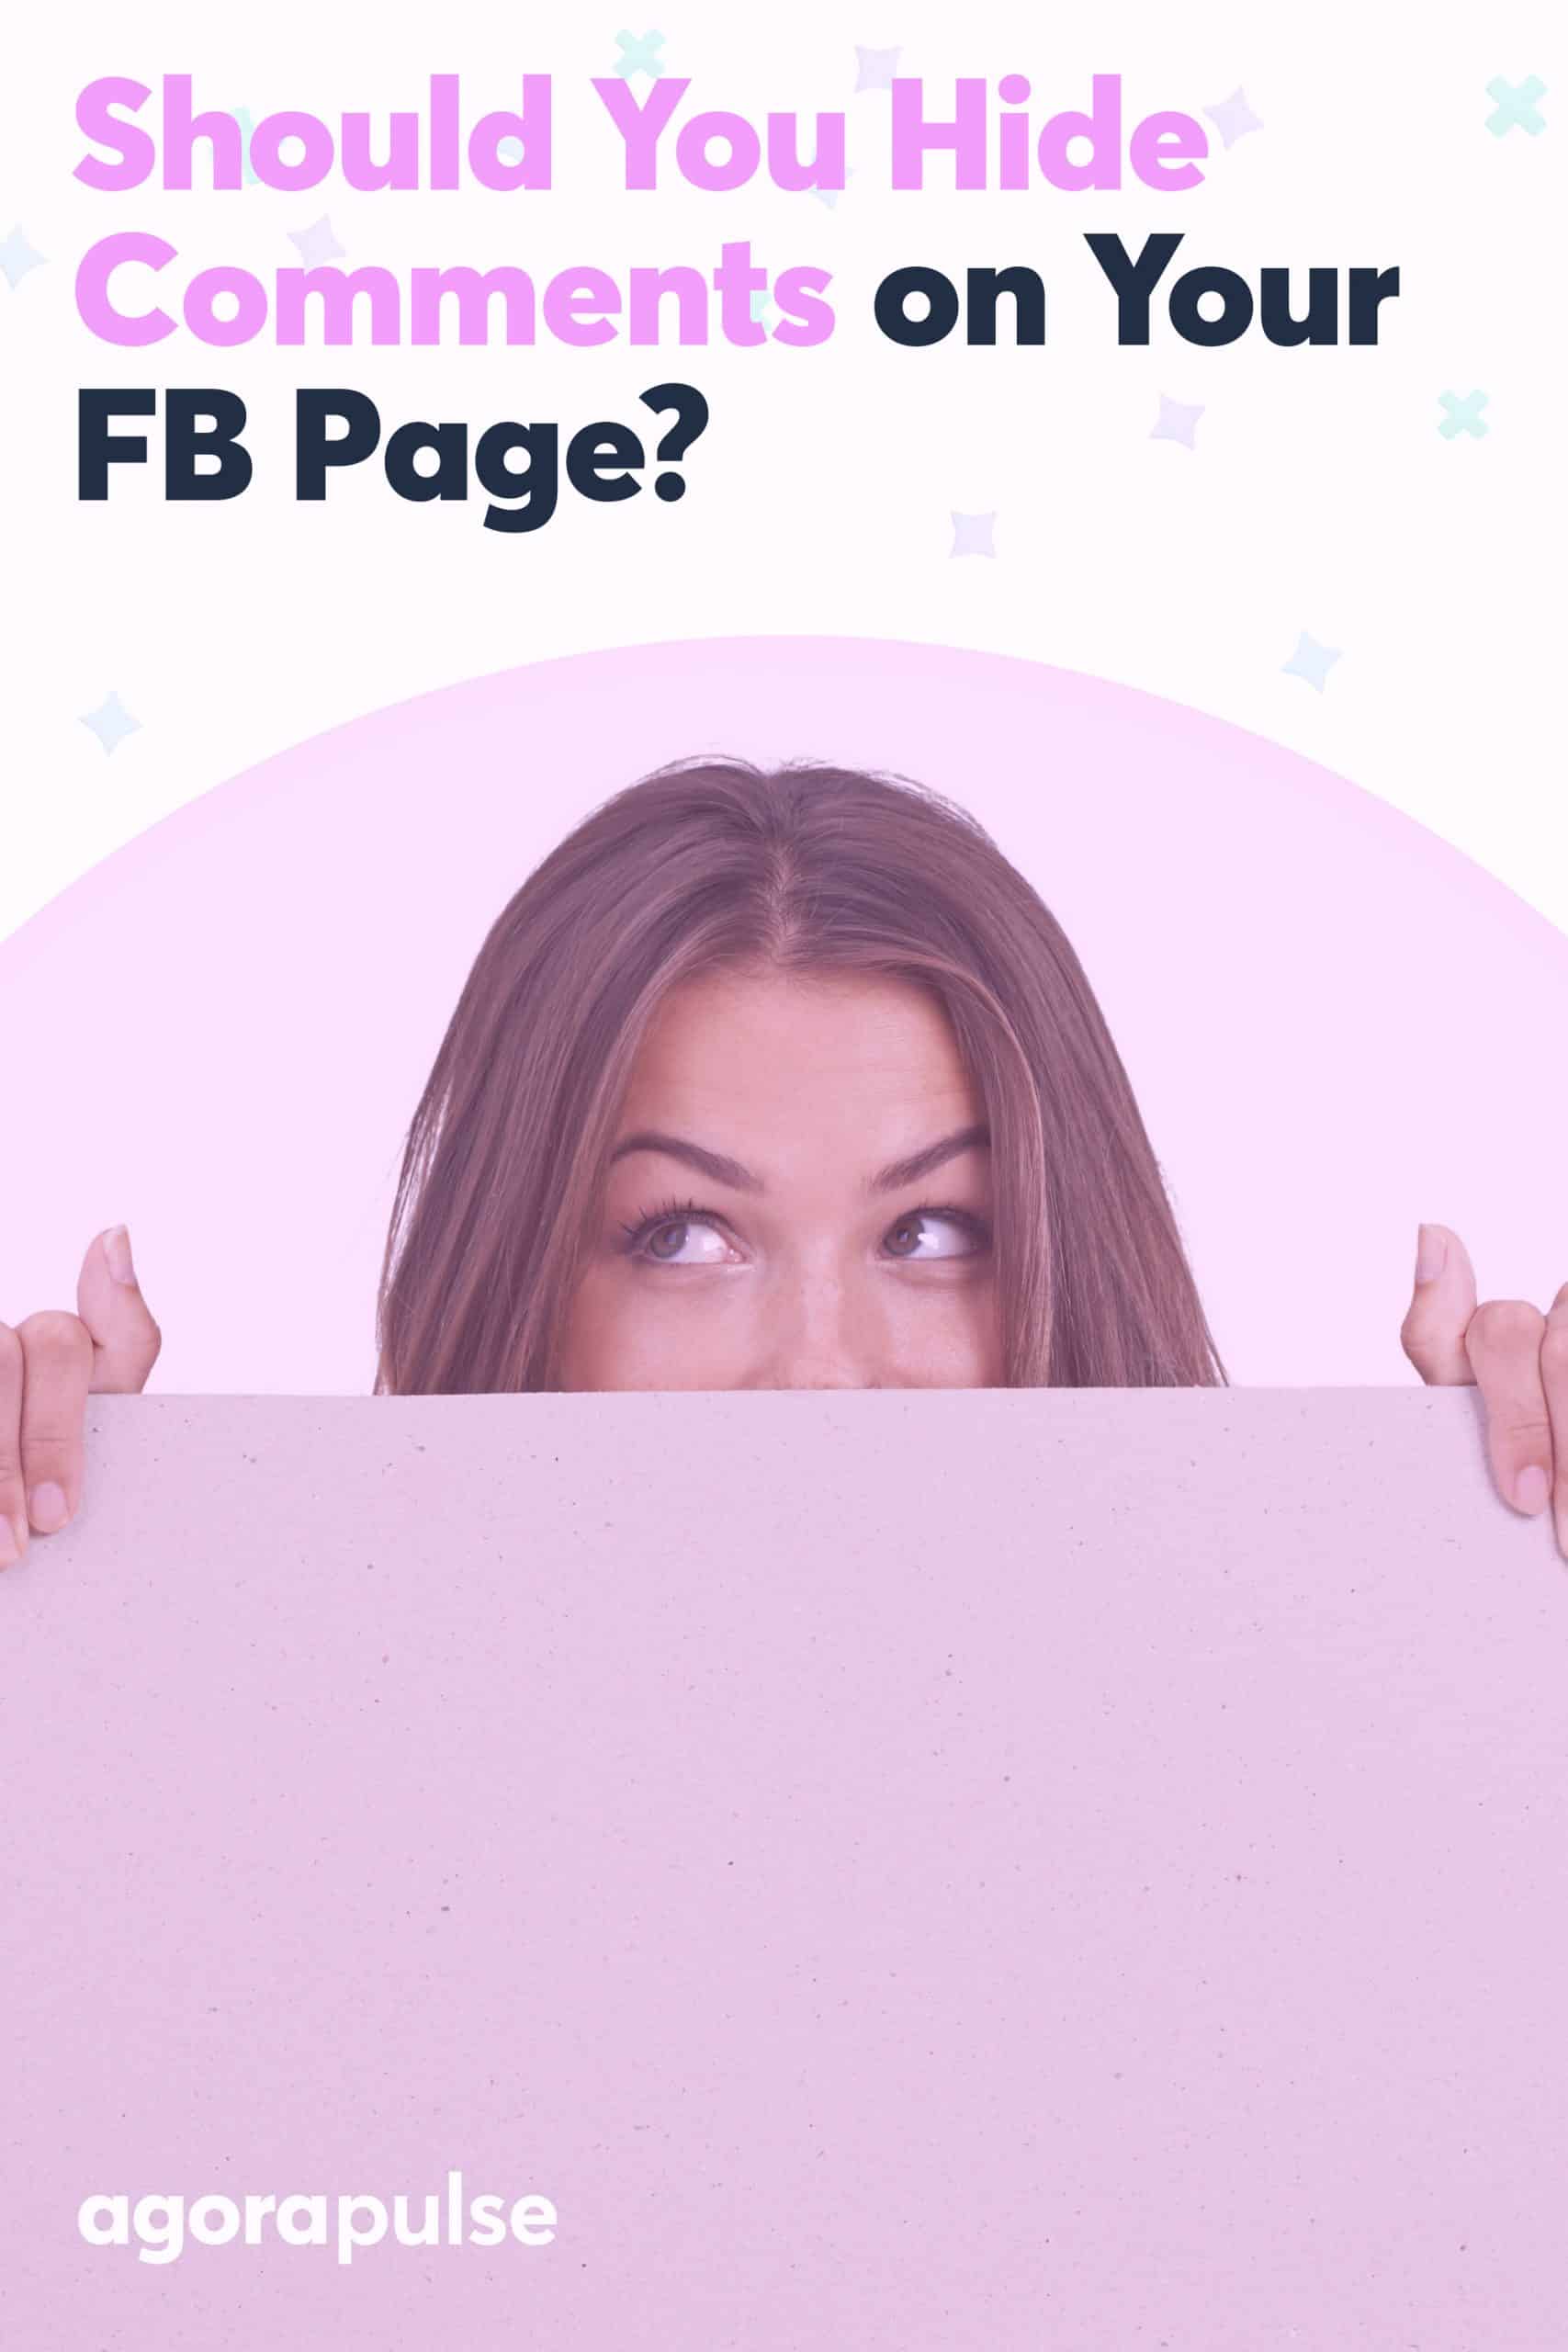 Should You Hide Comments on Your Facebook Page?